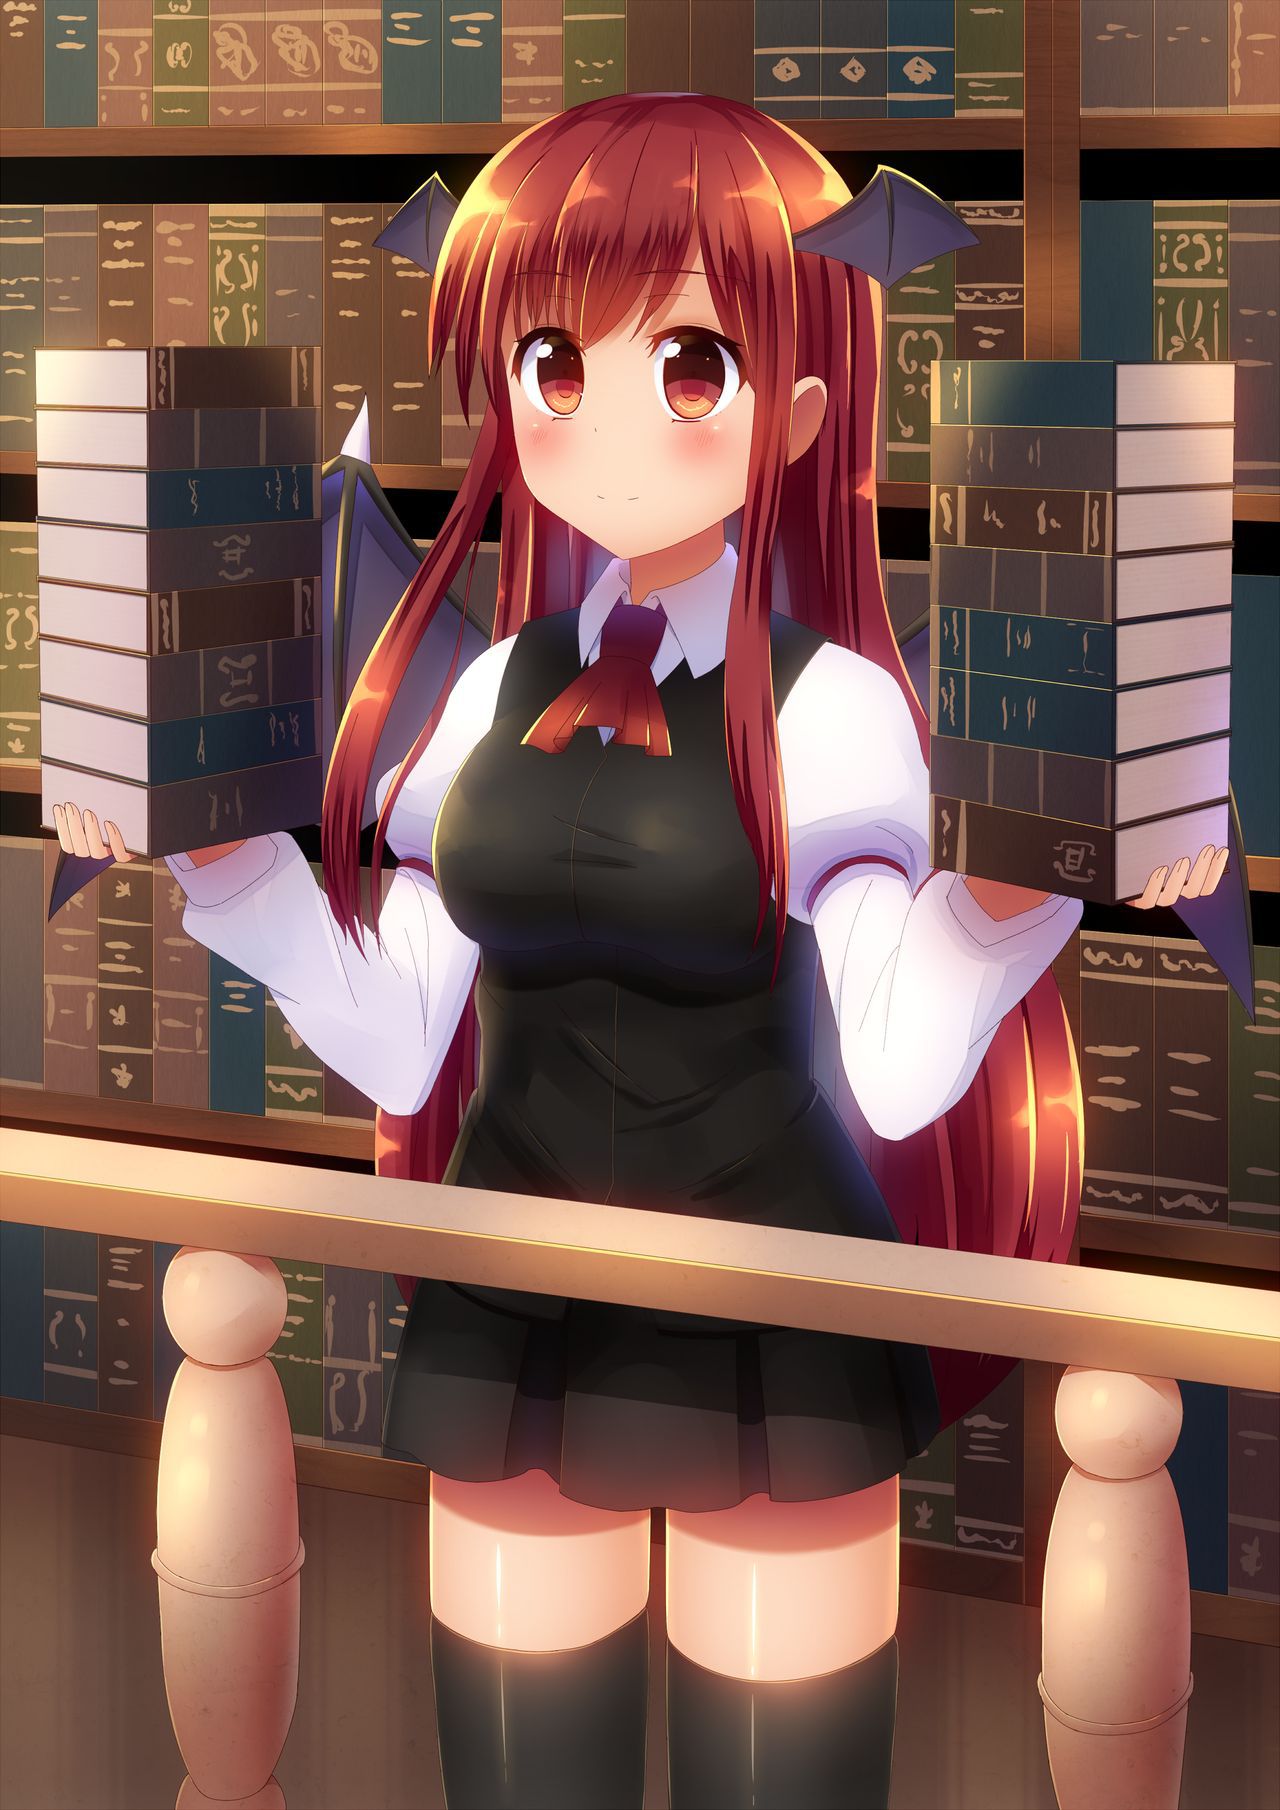 In The Library 94